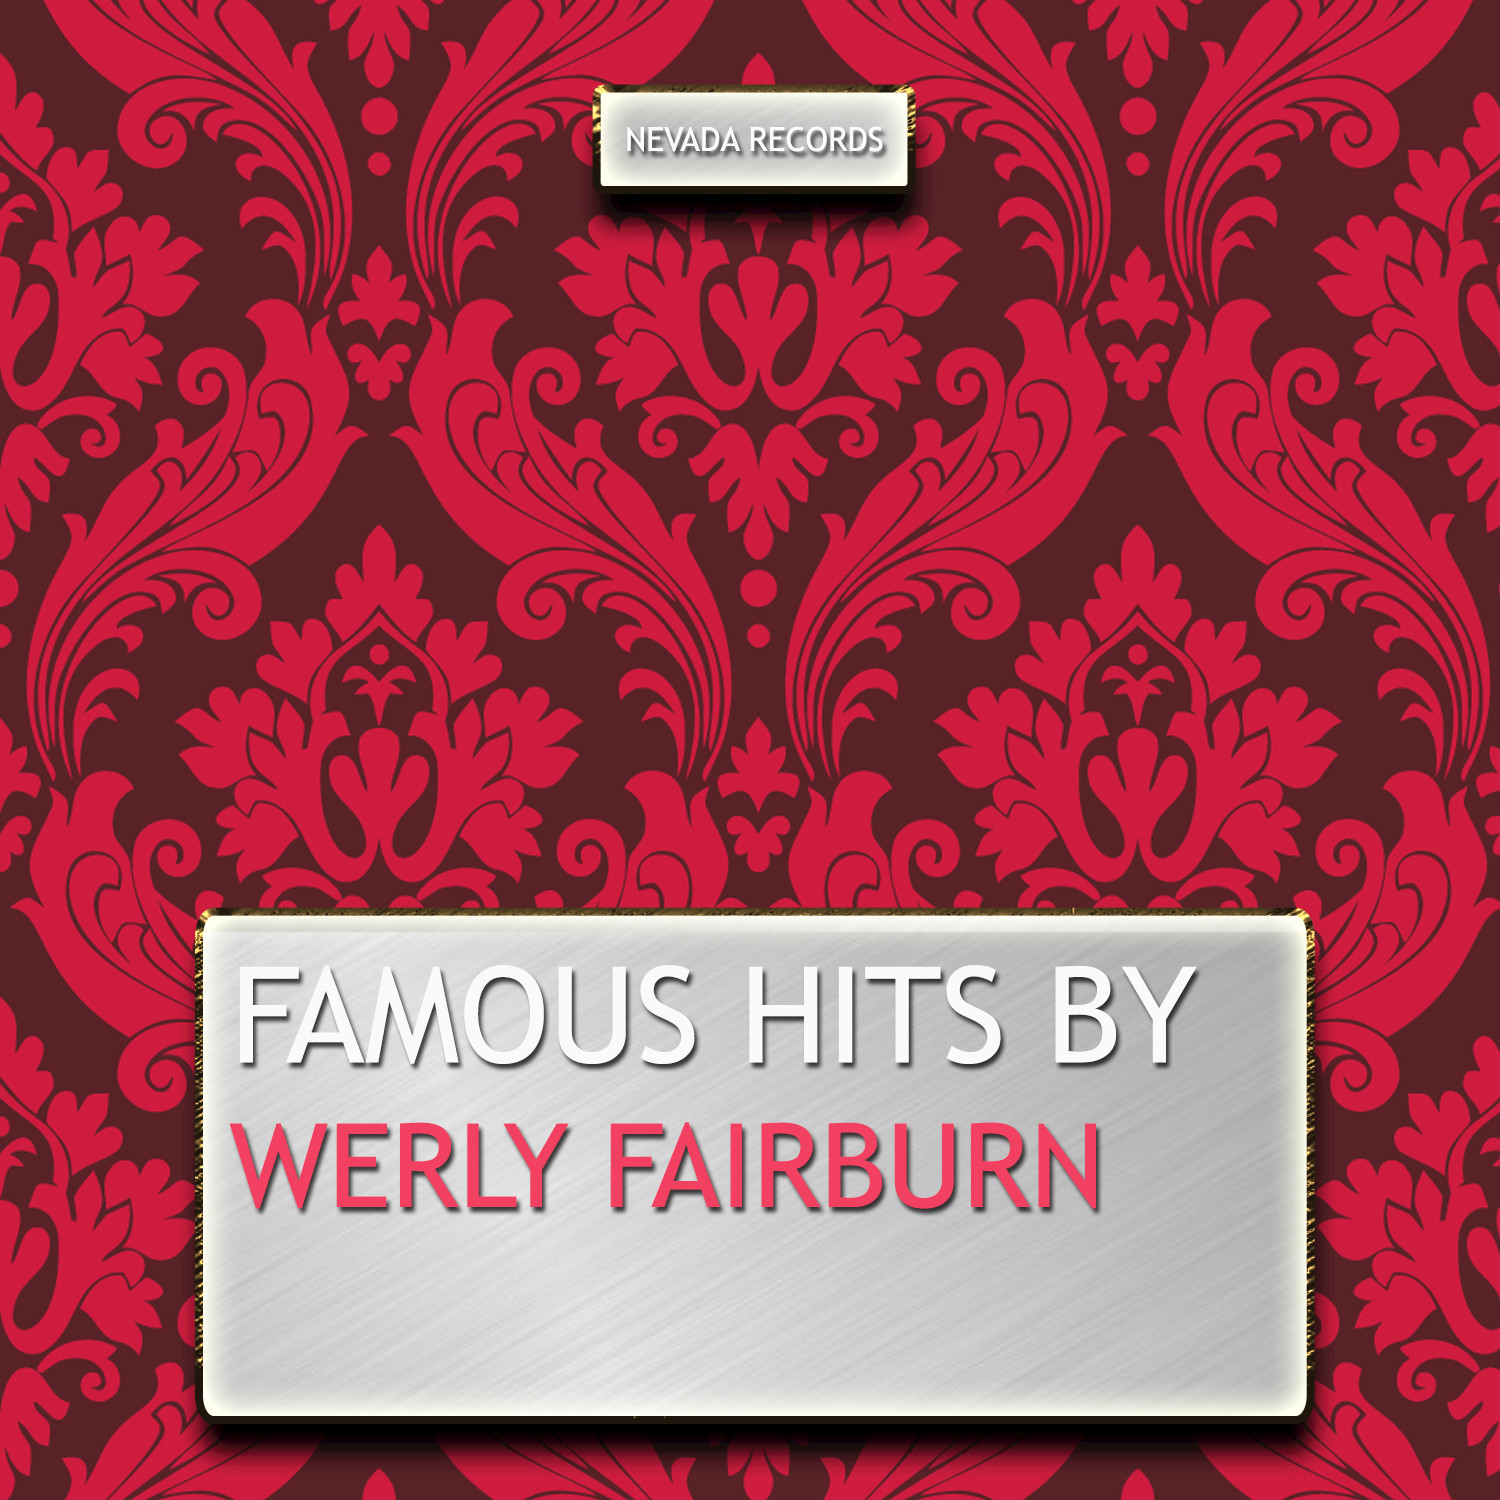 Famous Hits By Werly Fairburn